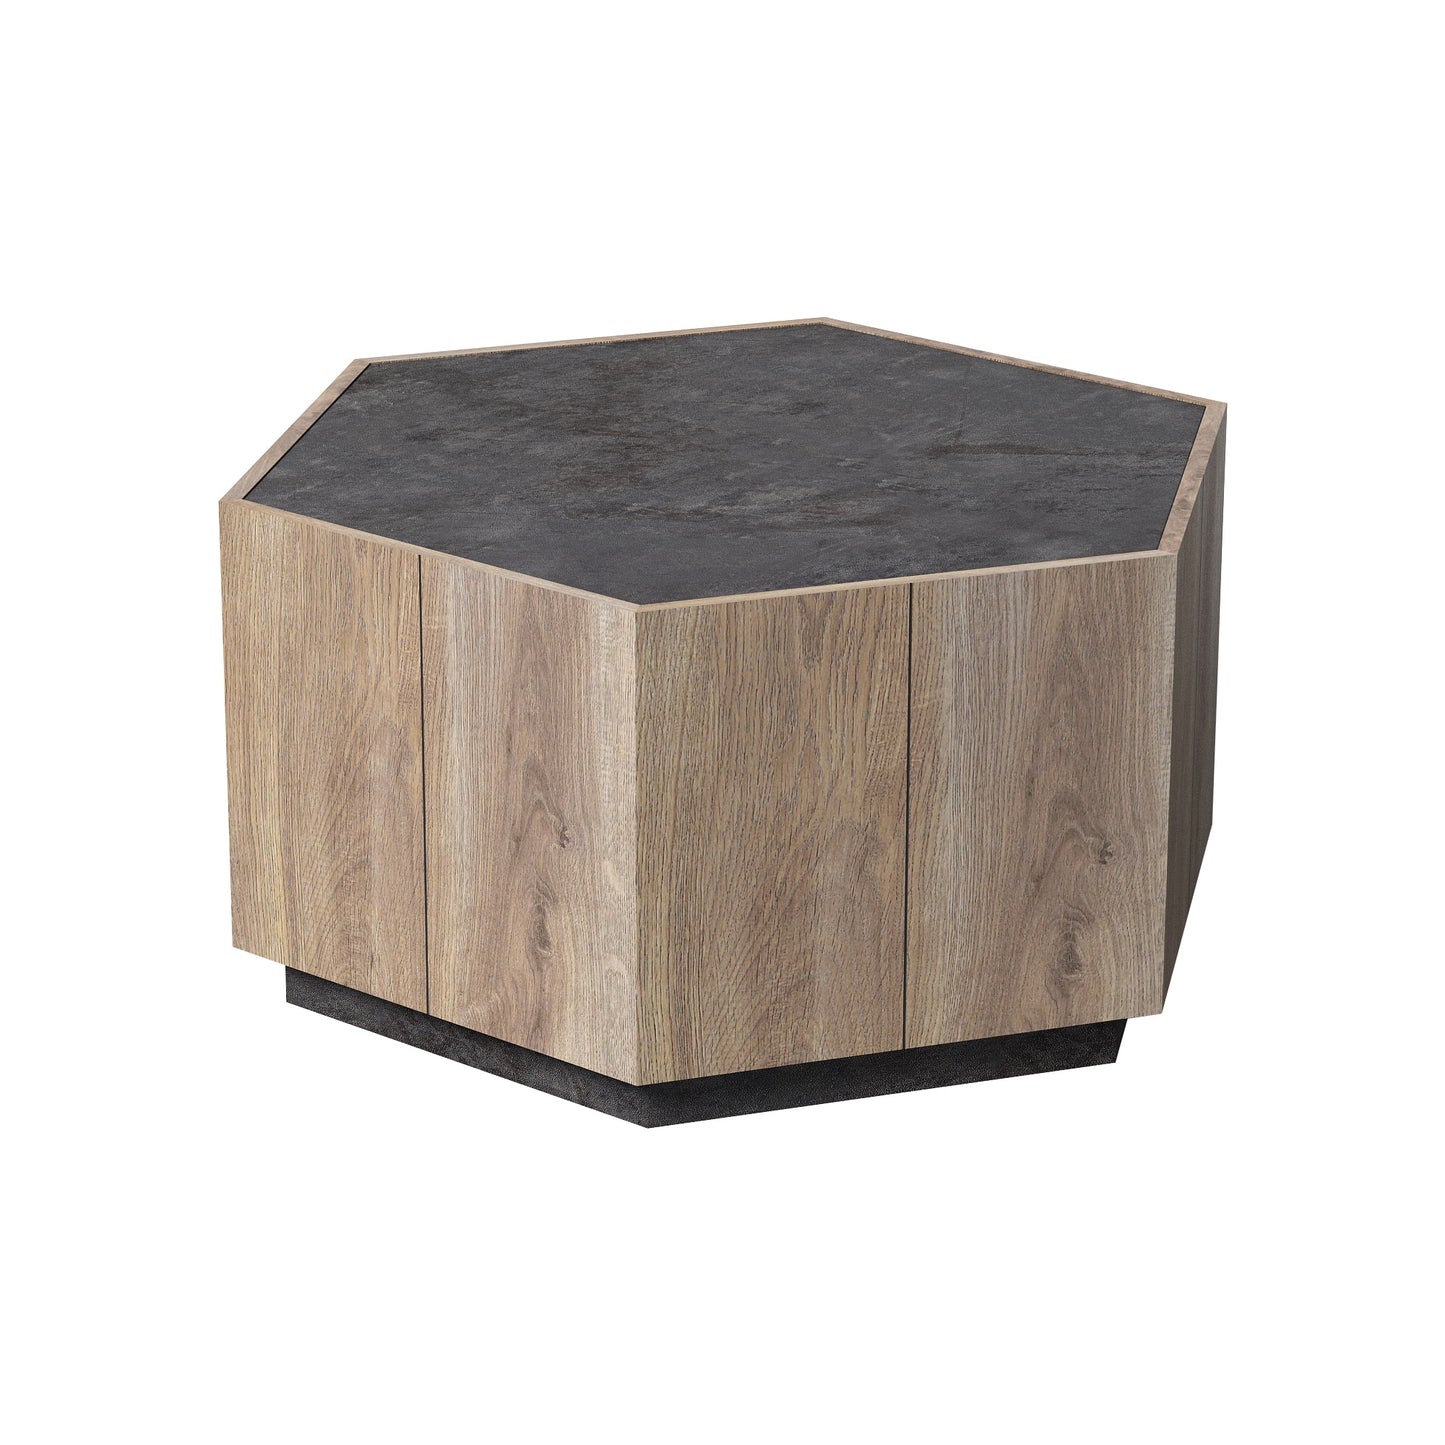 Hexagonal Rural Style Garden Retro Living Room Coffee Table with 2 drawers, Textured Black + Warm Oak